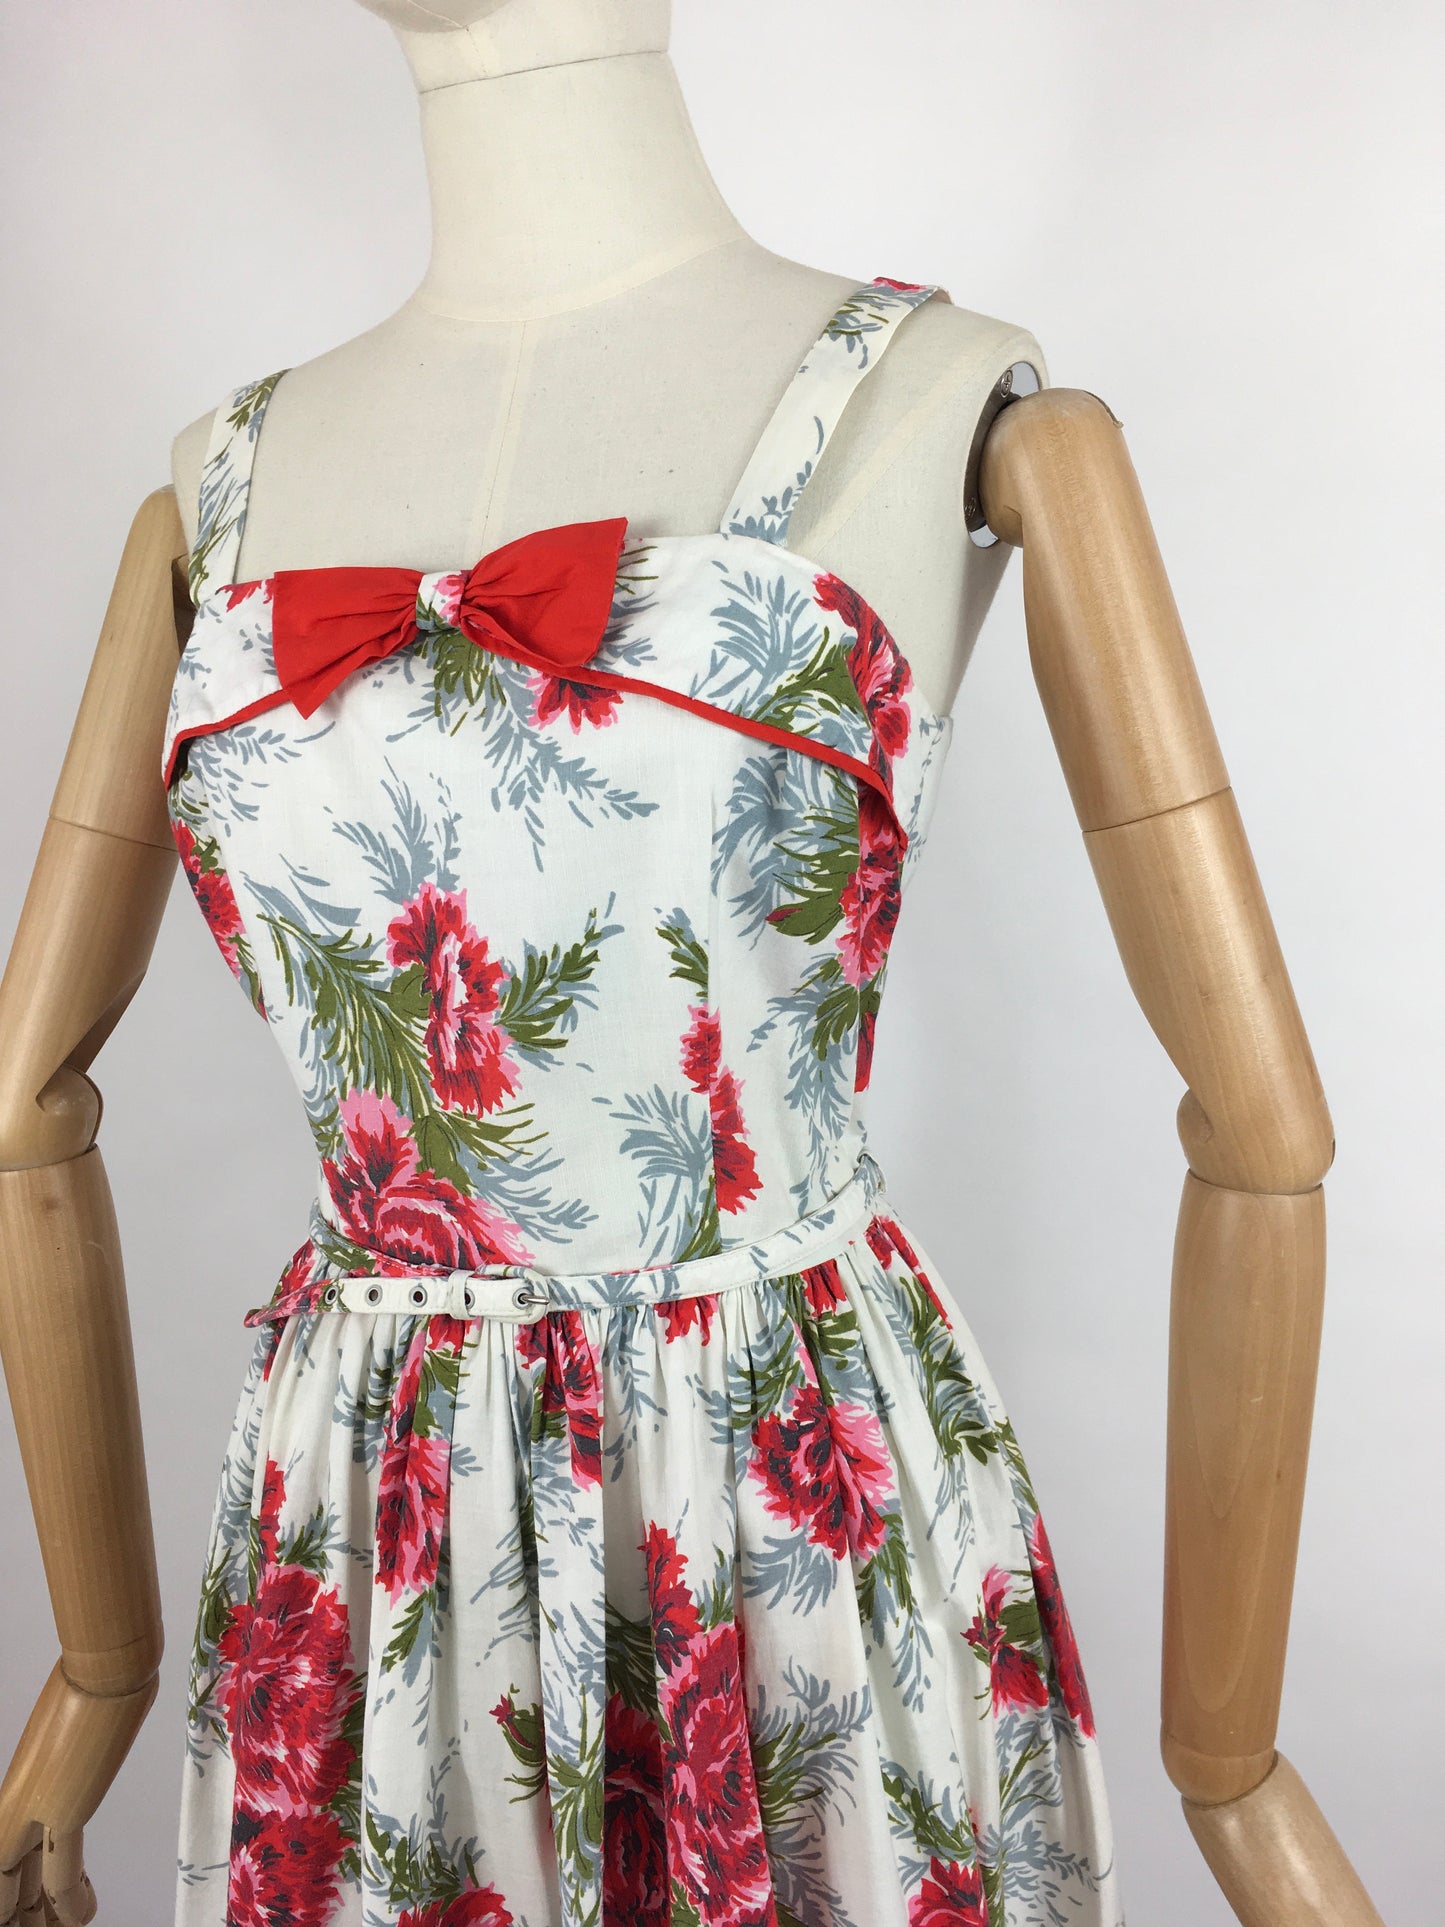 Original 1950s Floral Sun Dress with Contrast Bow and Piping - Beautiful Carnation Print Cotton in Bright Reds, Corals and Greens